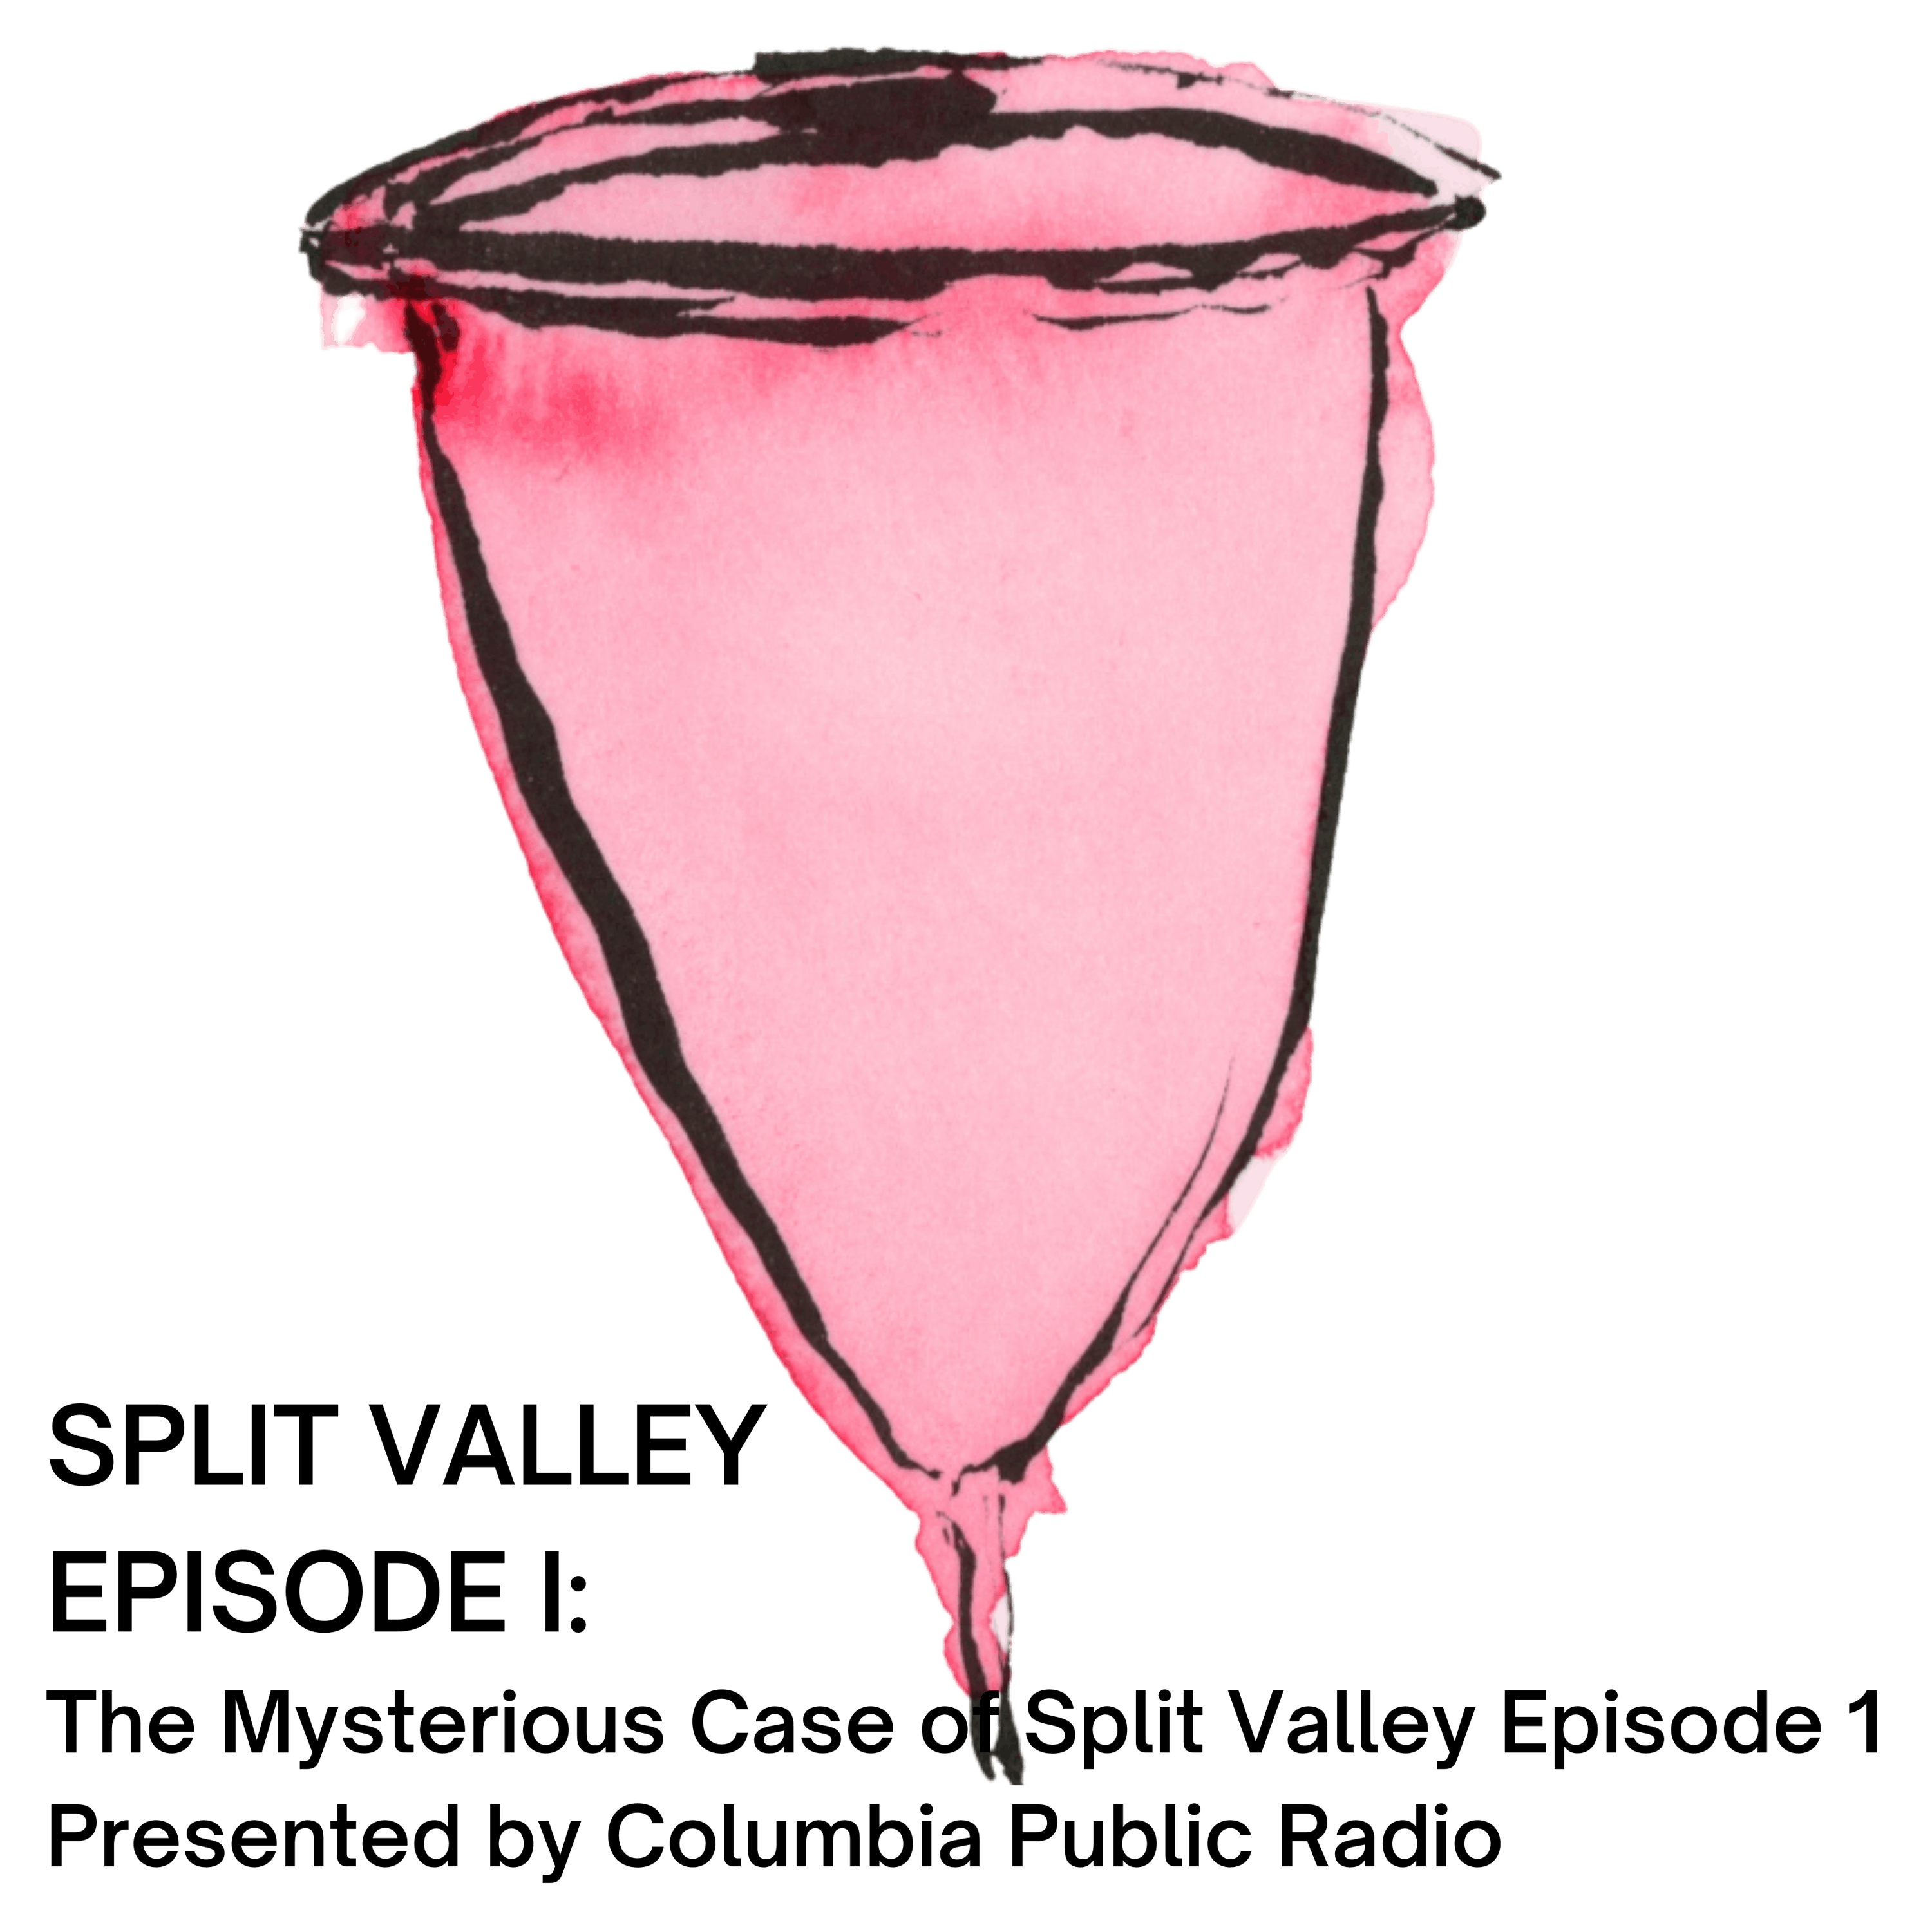 Episode I: The Mysterious Case of Split Valley Episode 1 Presented by Columbia Public Radio